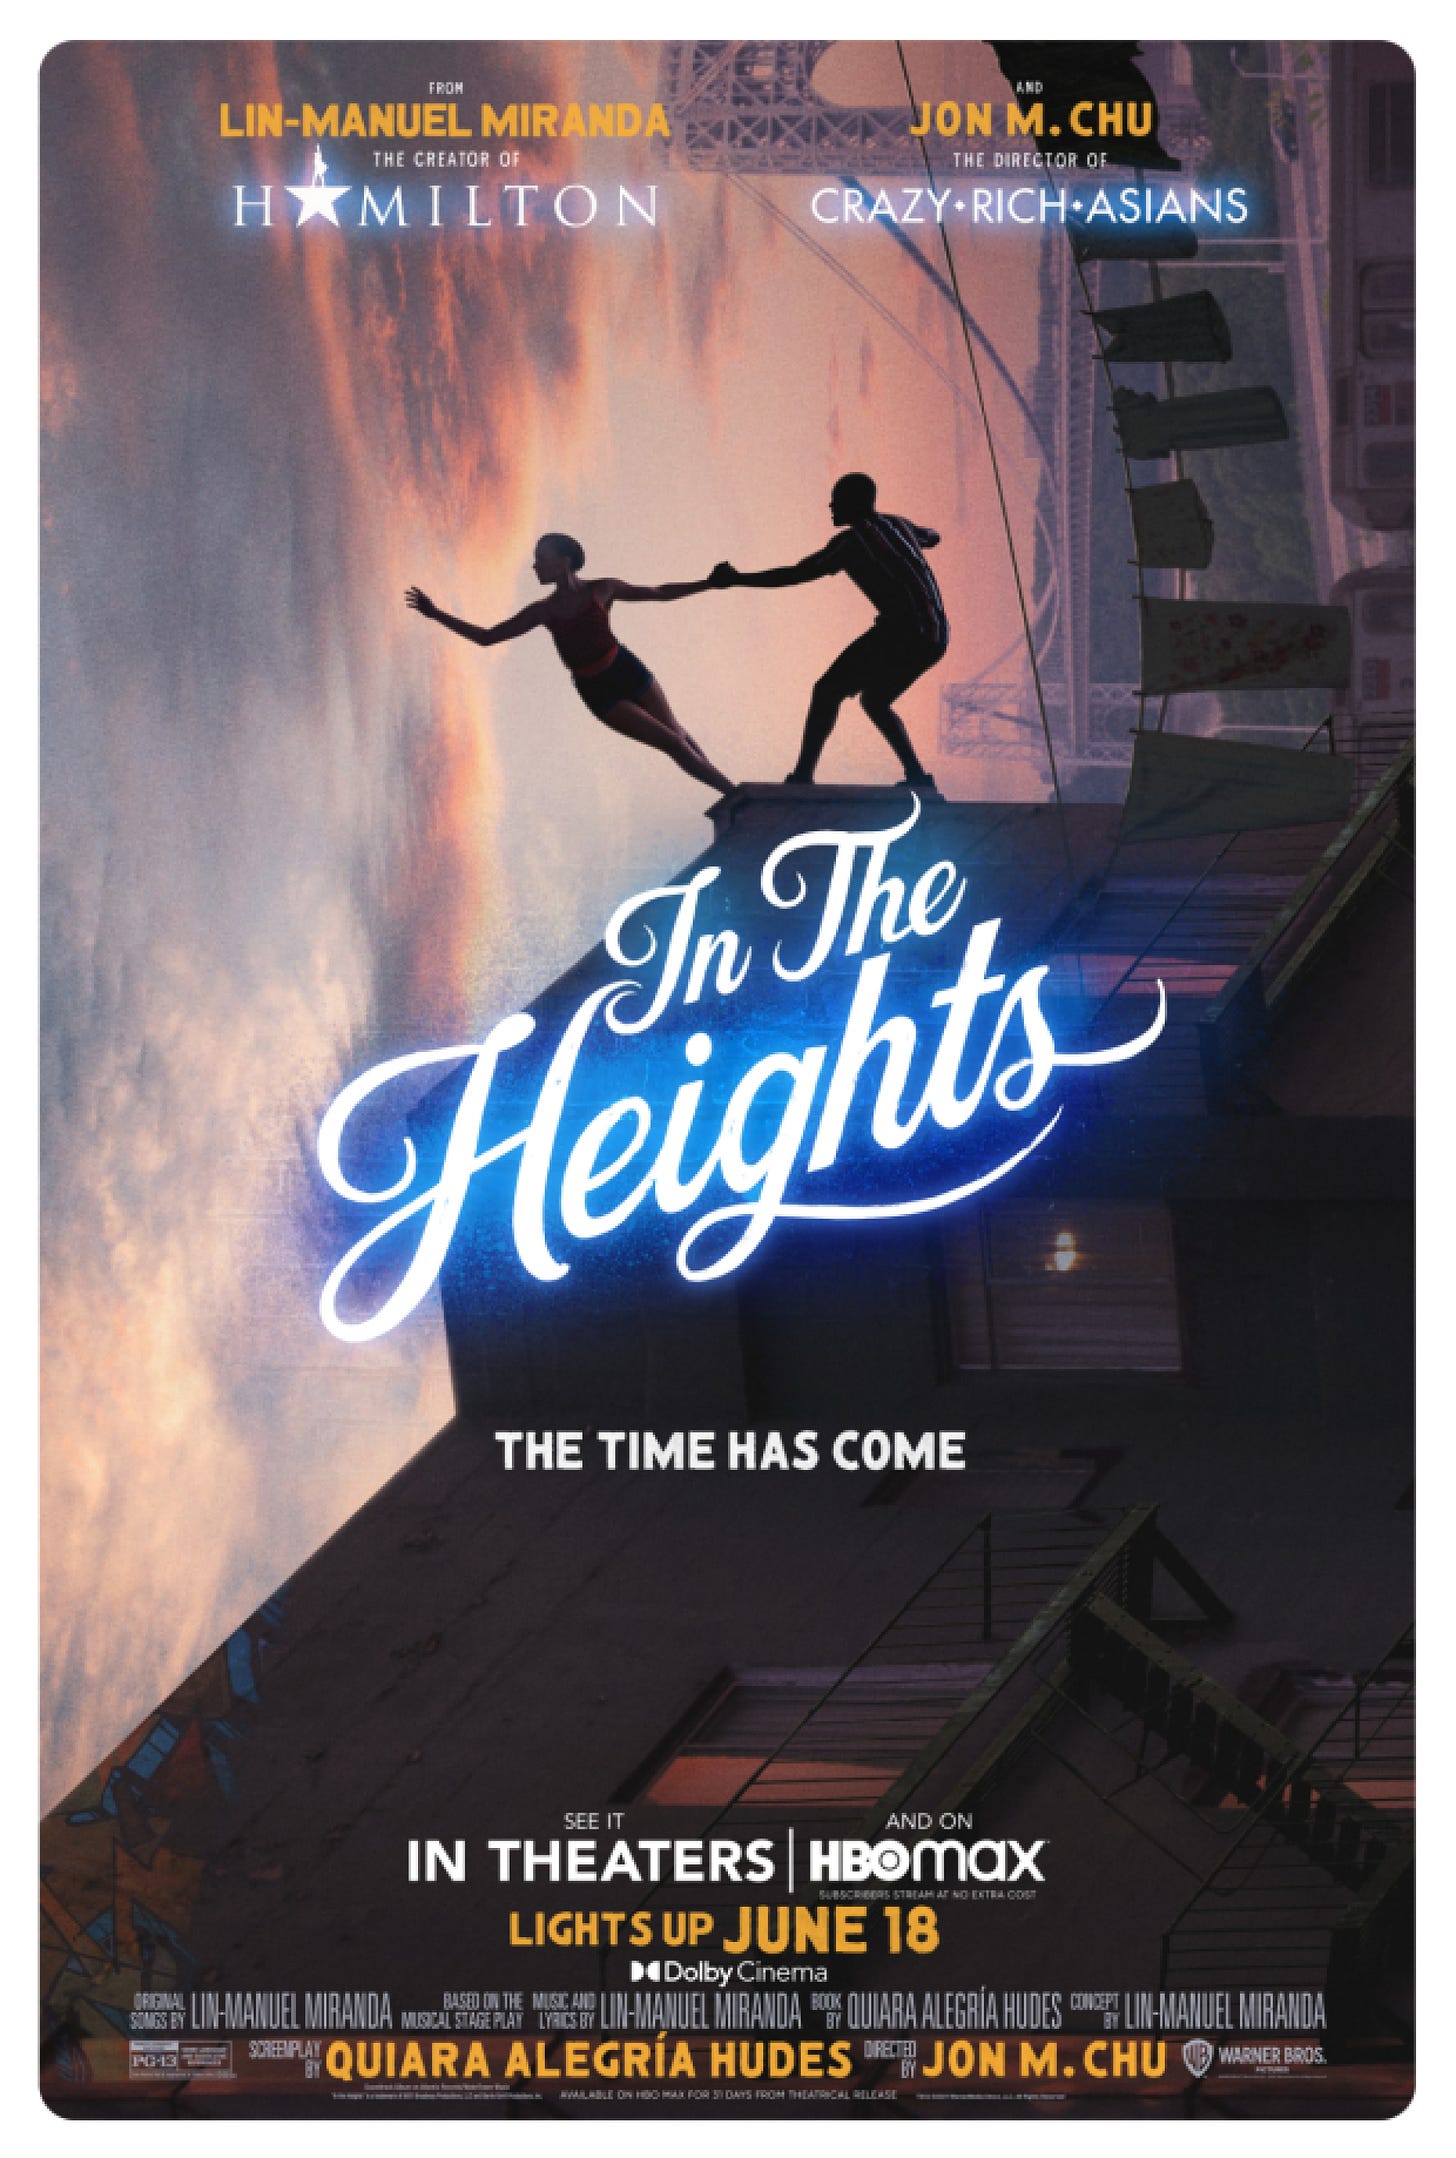 Six In the Heights film posters released – ahead of the new trailer this  weekend | WhatsOnStage